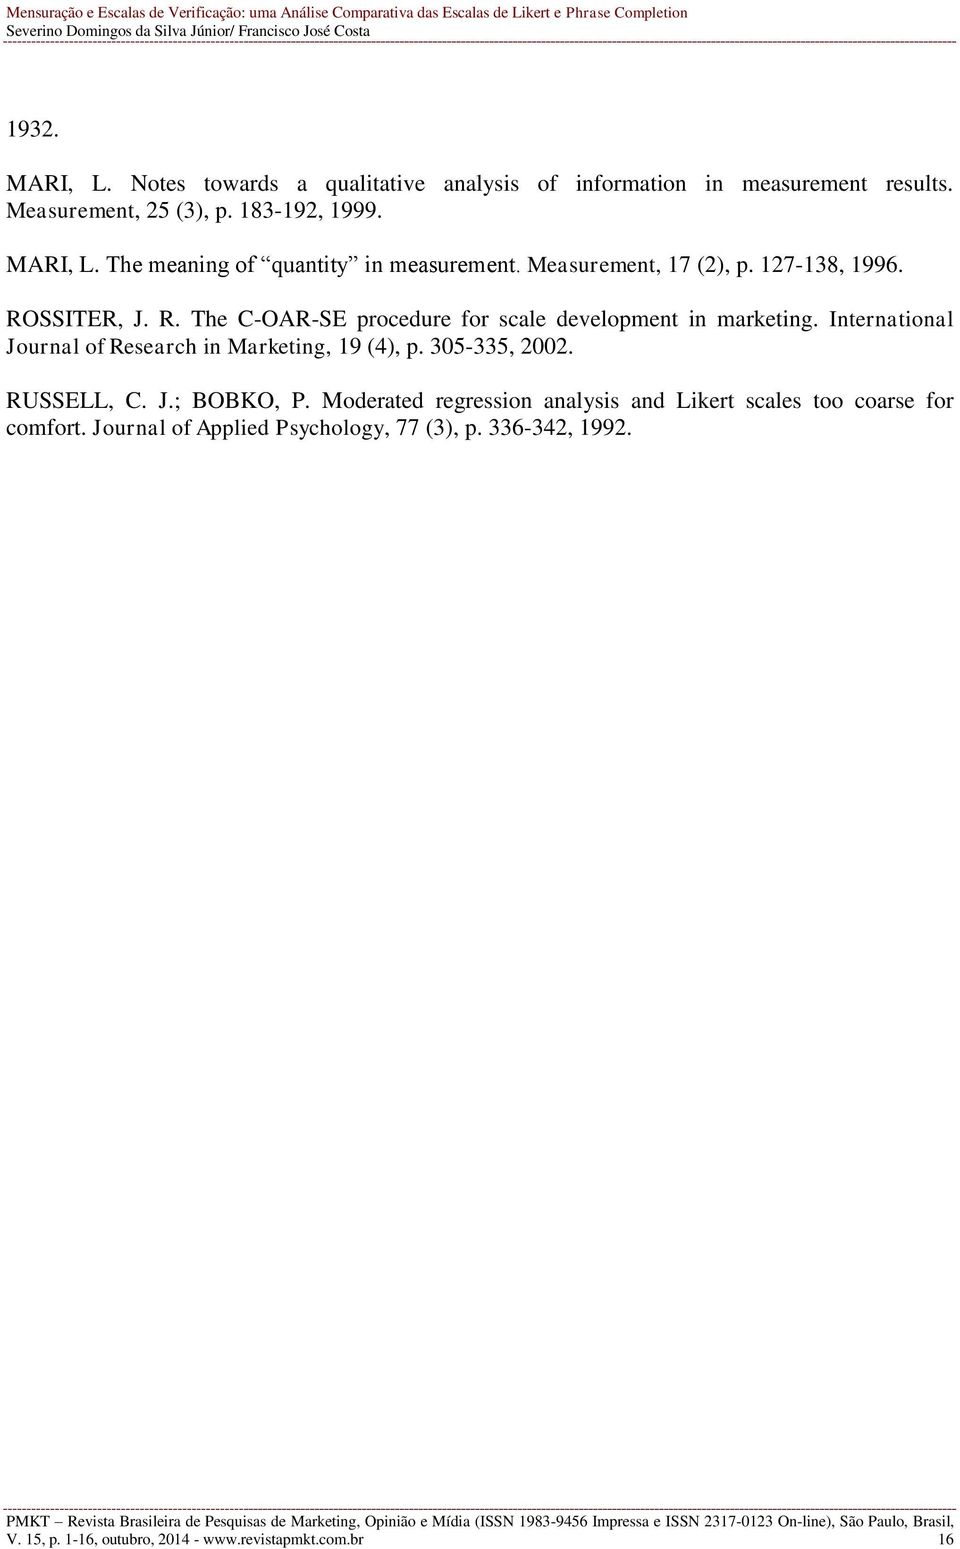 International Journal of Research in Marketing, 19 (4), p. 305-335, 2002. RUSSELL, C. J.; BOBKO, P.